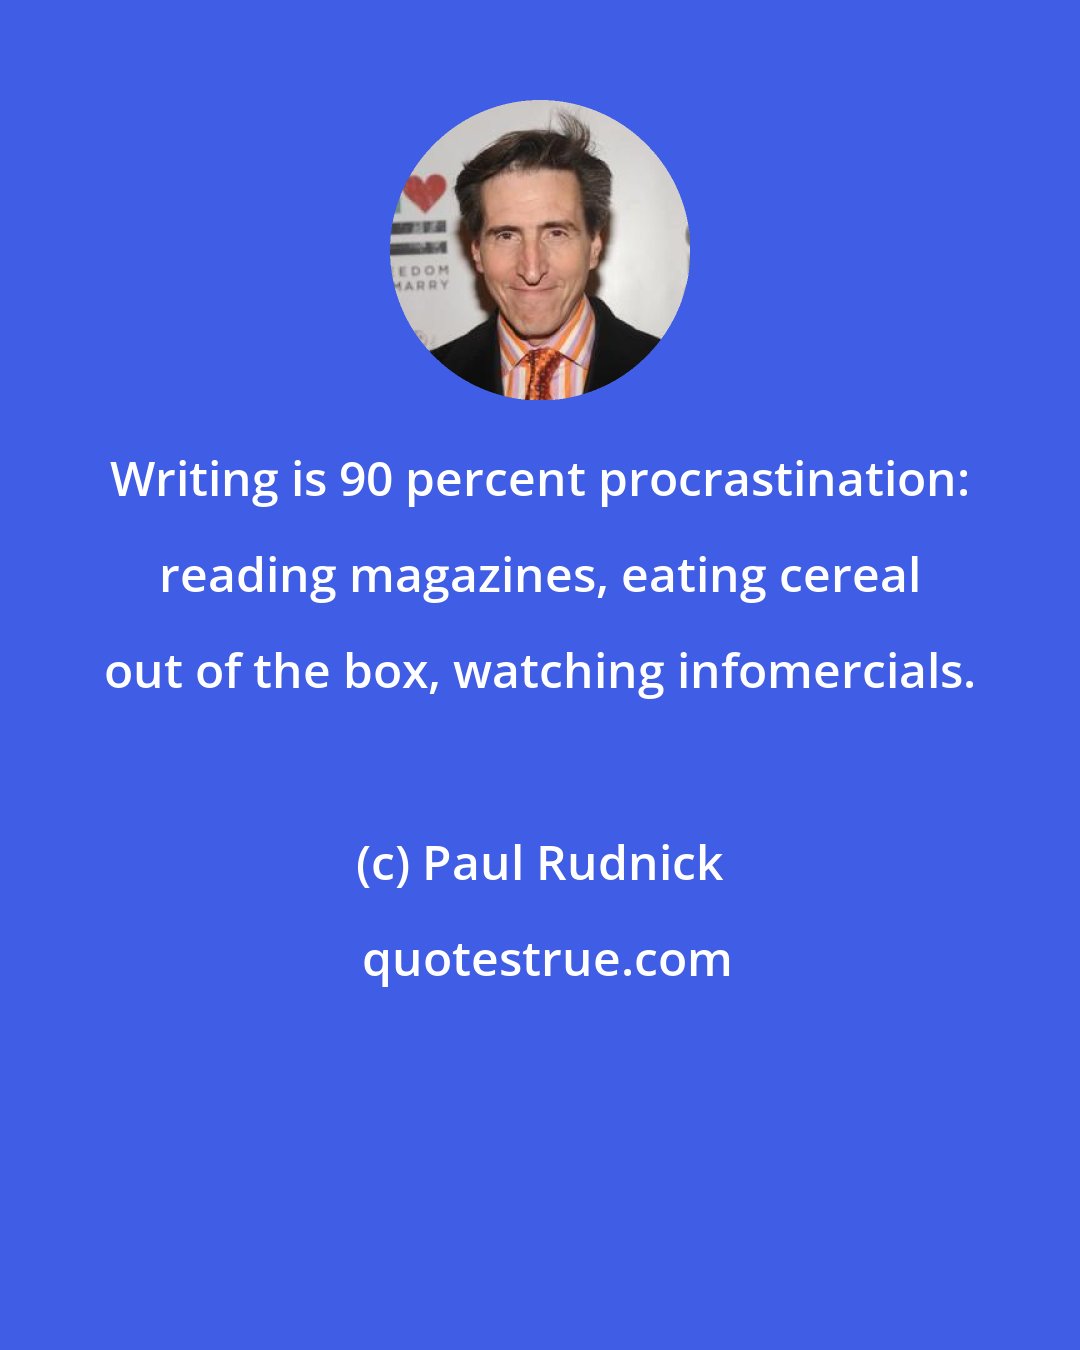 Paul Rudnick: Writing is 90 percent procrastination: reading magazines, eating cereal out of the box, watching infomercials.